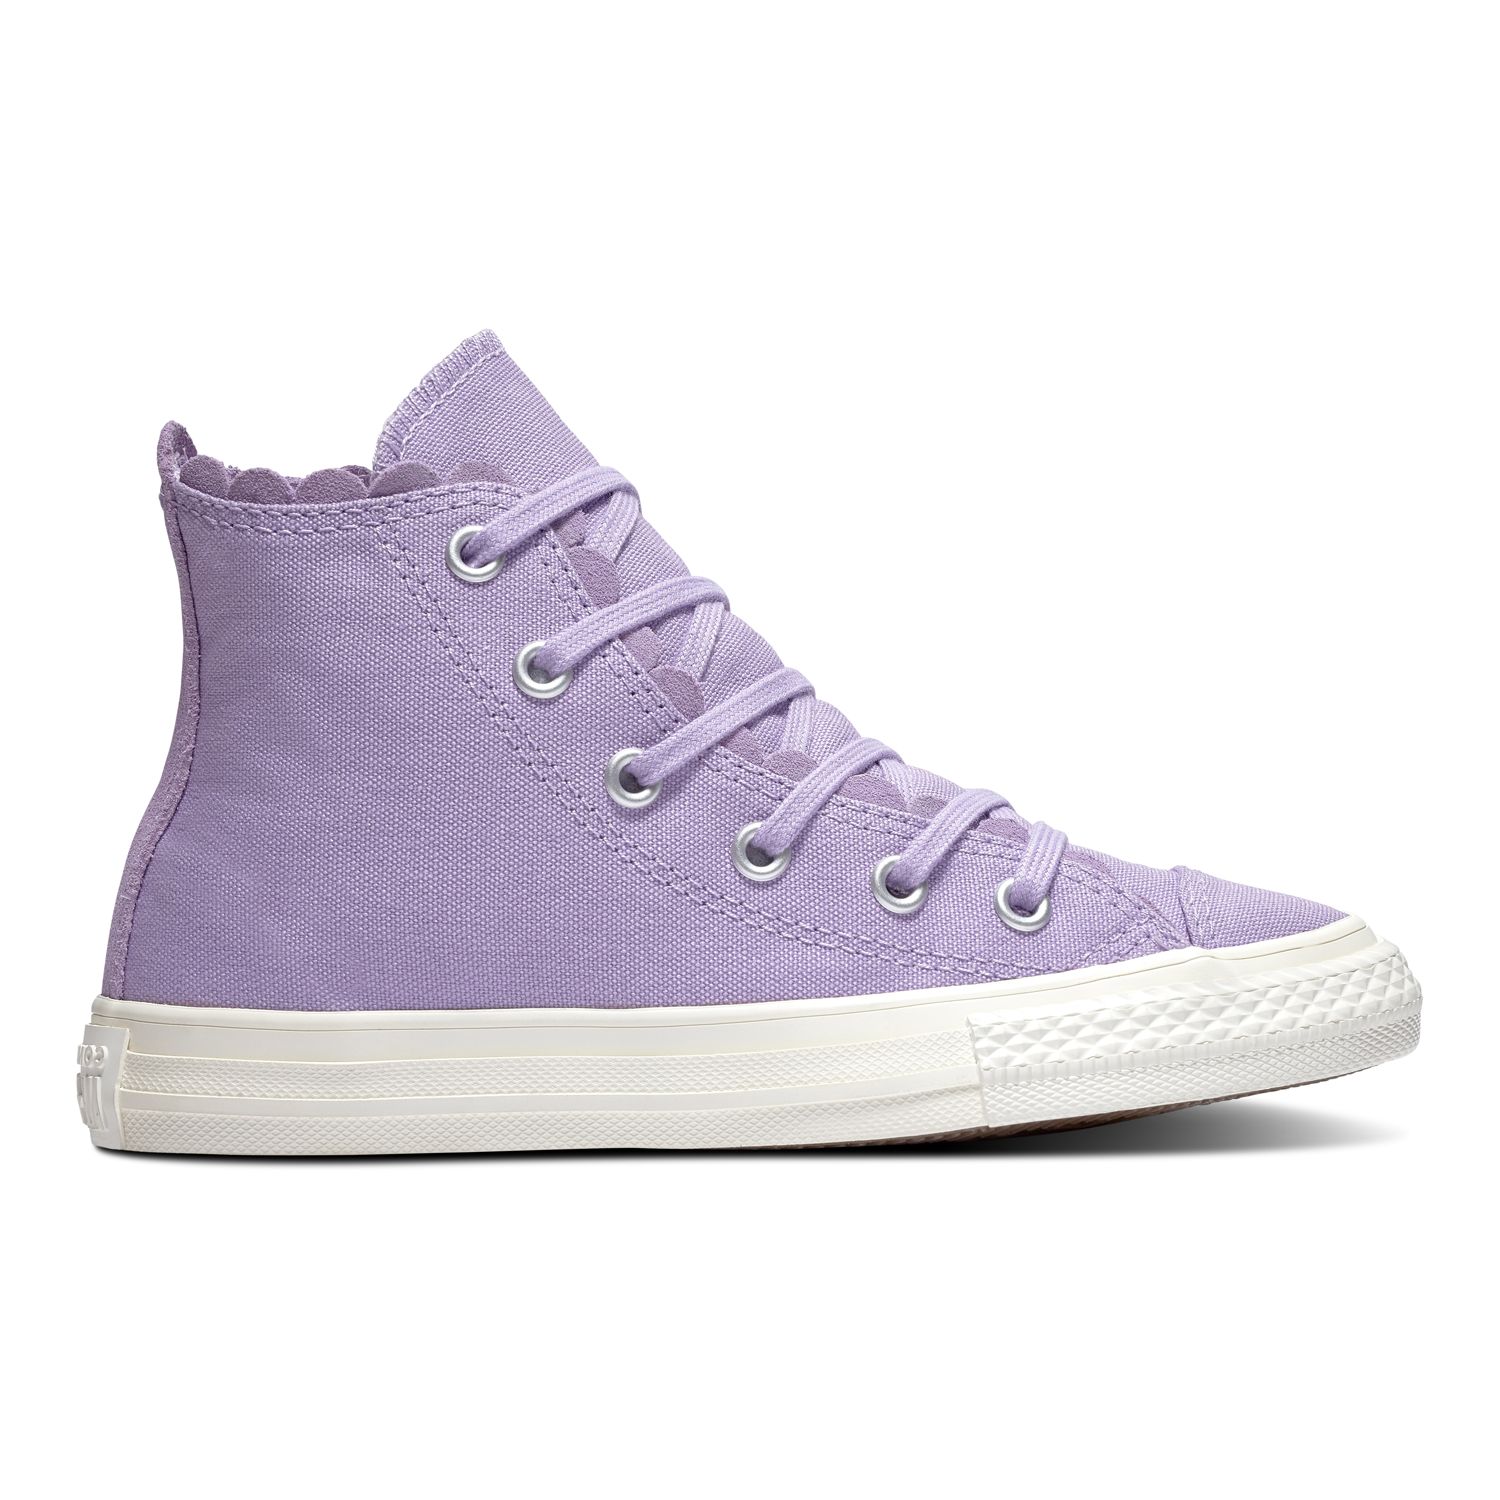 chuck taylor all star frilly thrills high top